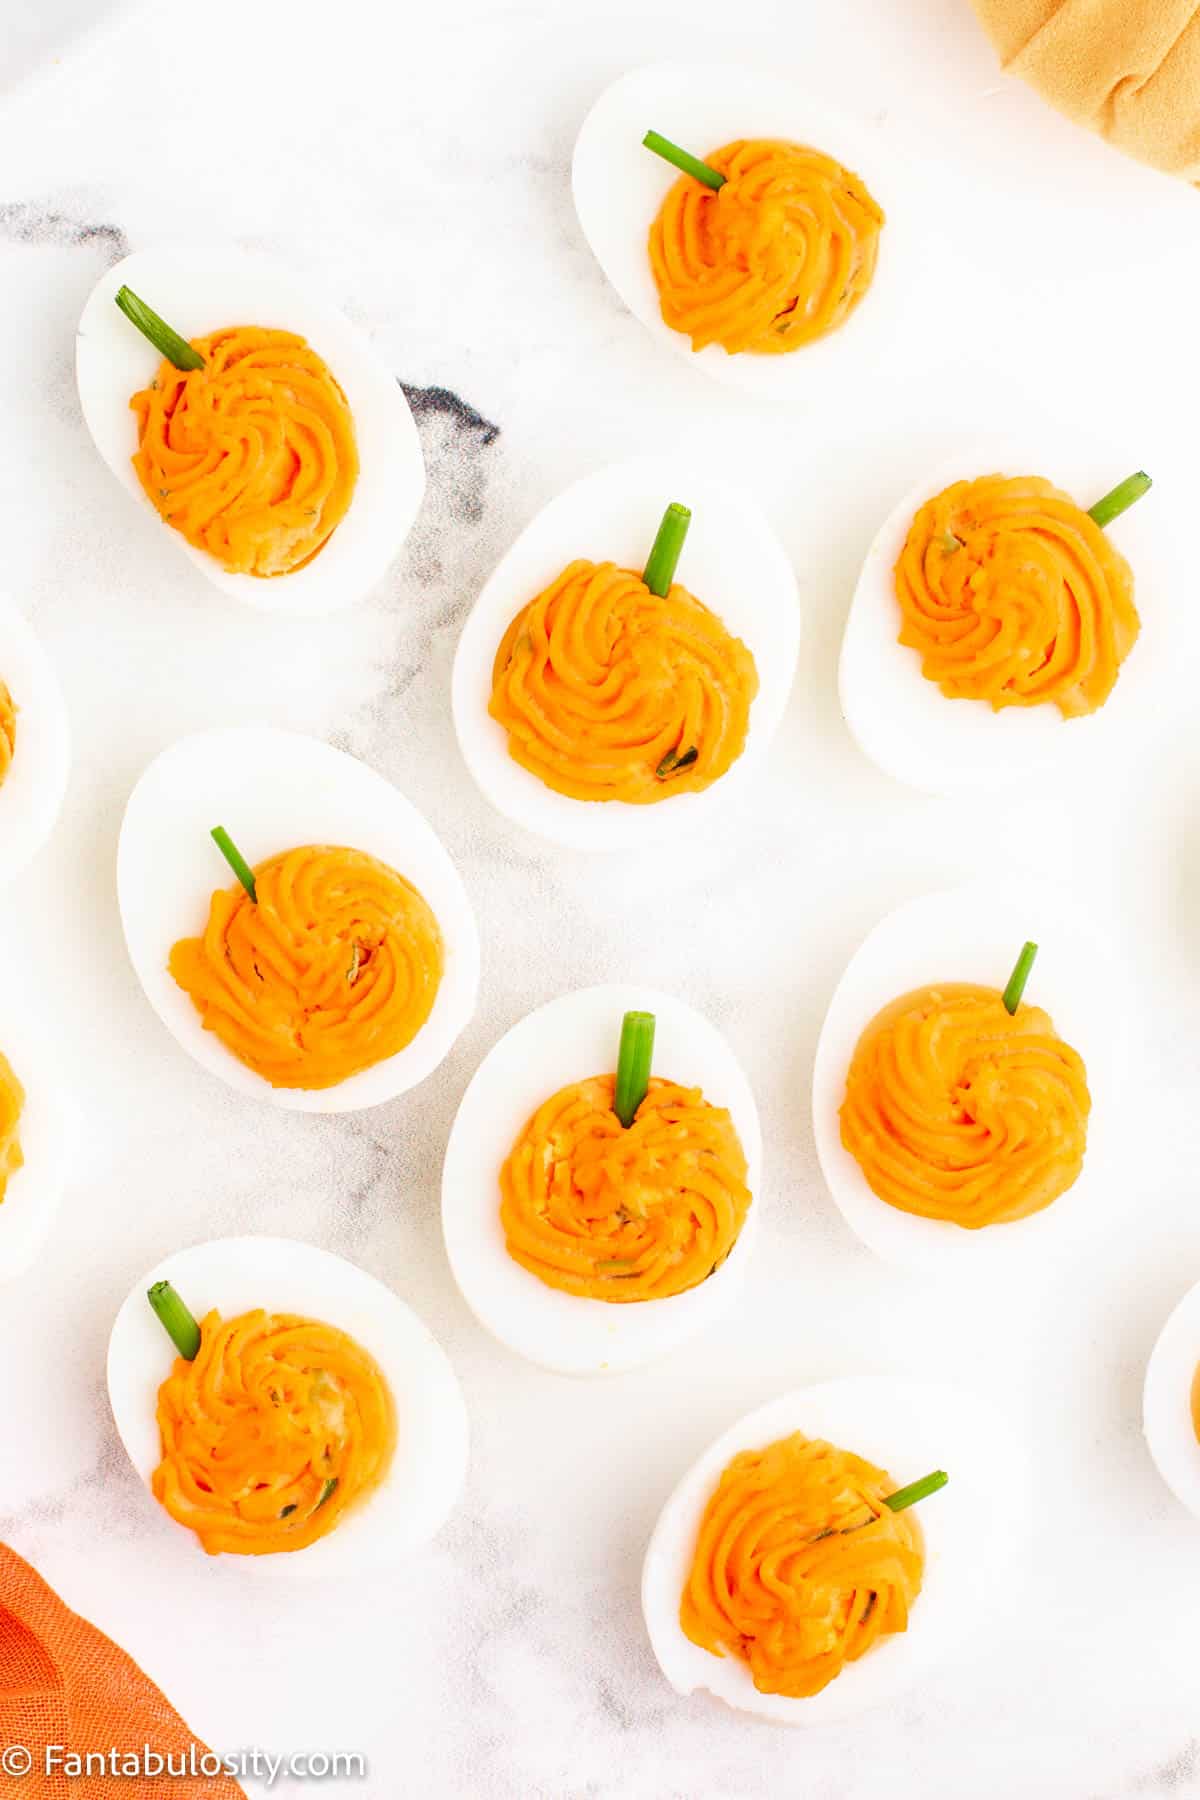 Hard boiled eggs halves filled to look like pumpkins are sitting on a white marble background